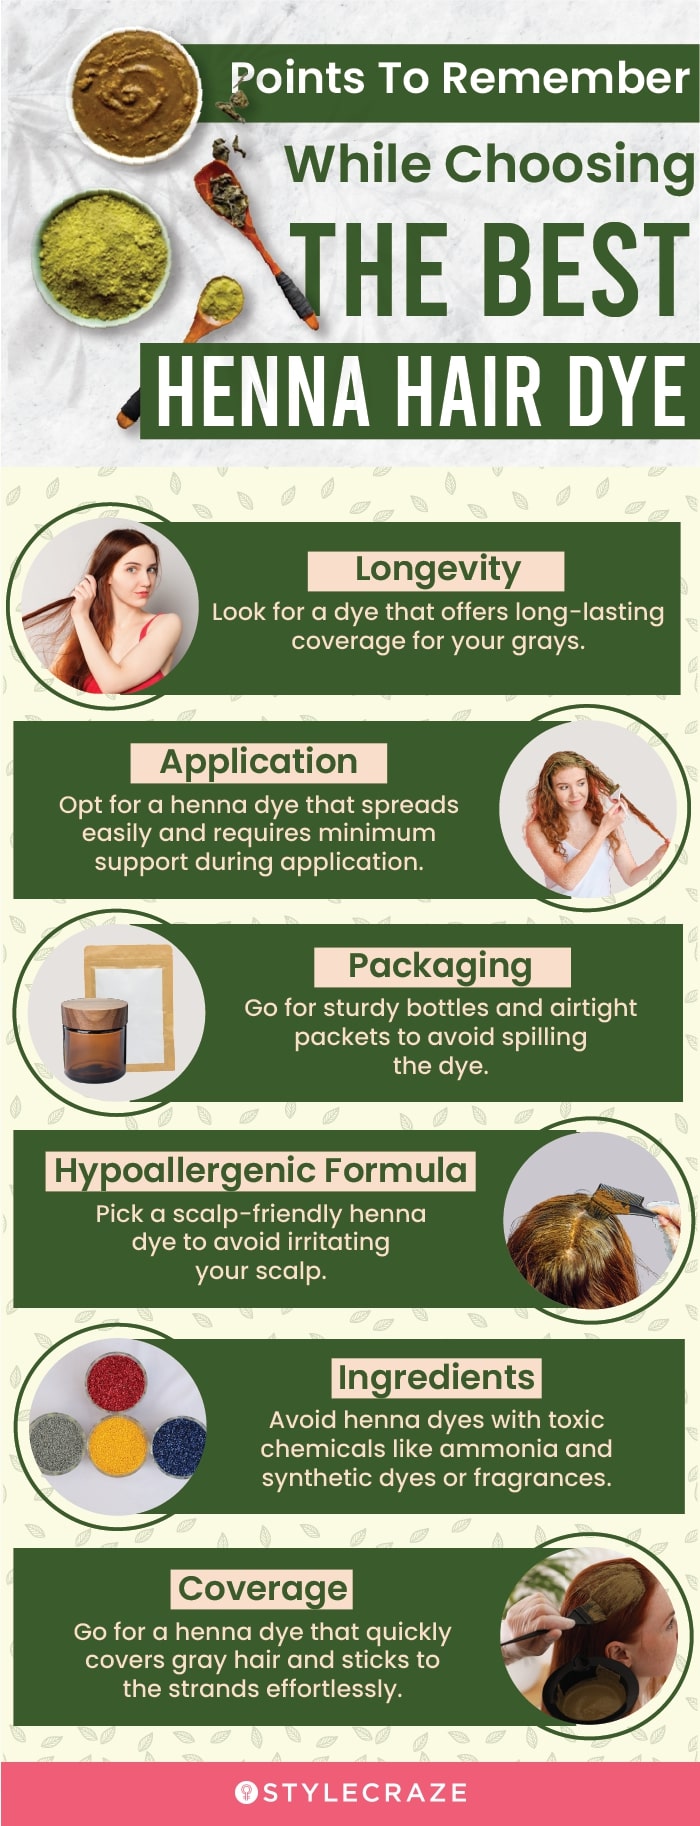 Points To Remember When Choosing The Best Henna Hair Dye [infographic]